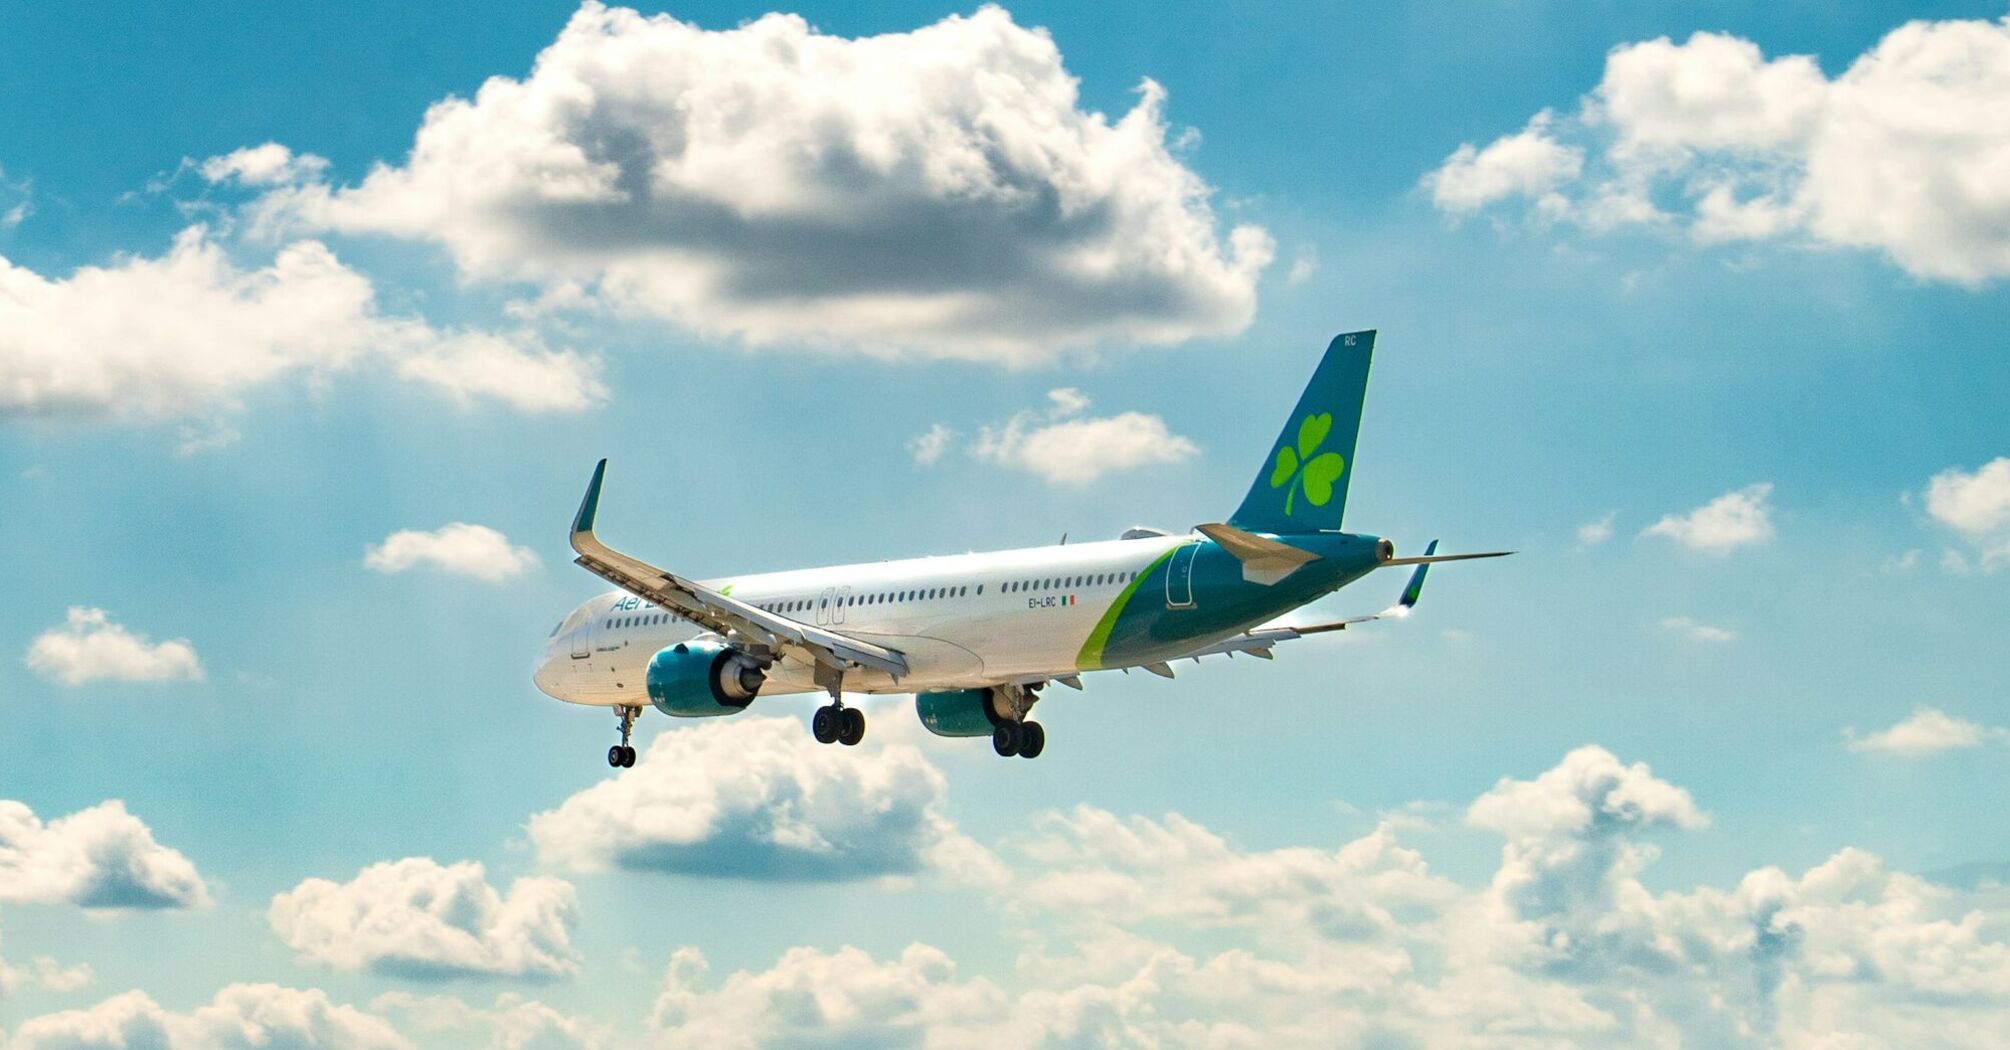 Aer Lingus aircraft in flight with blue sky and clouds